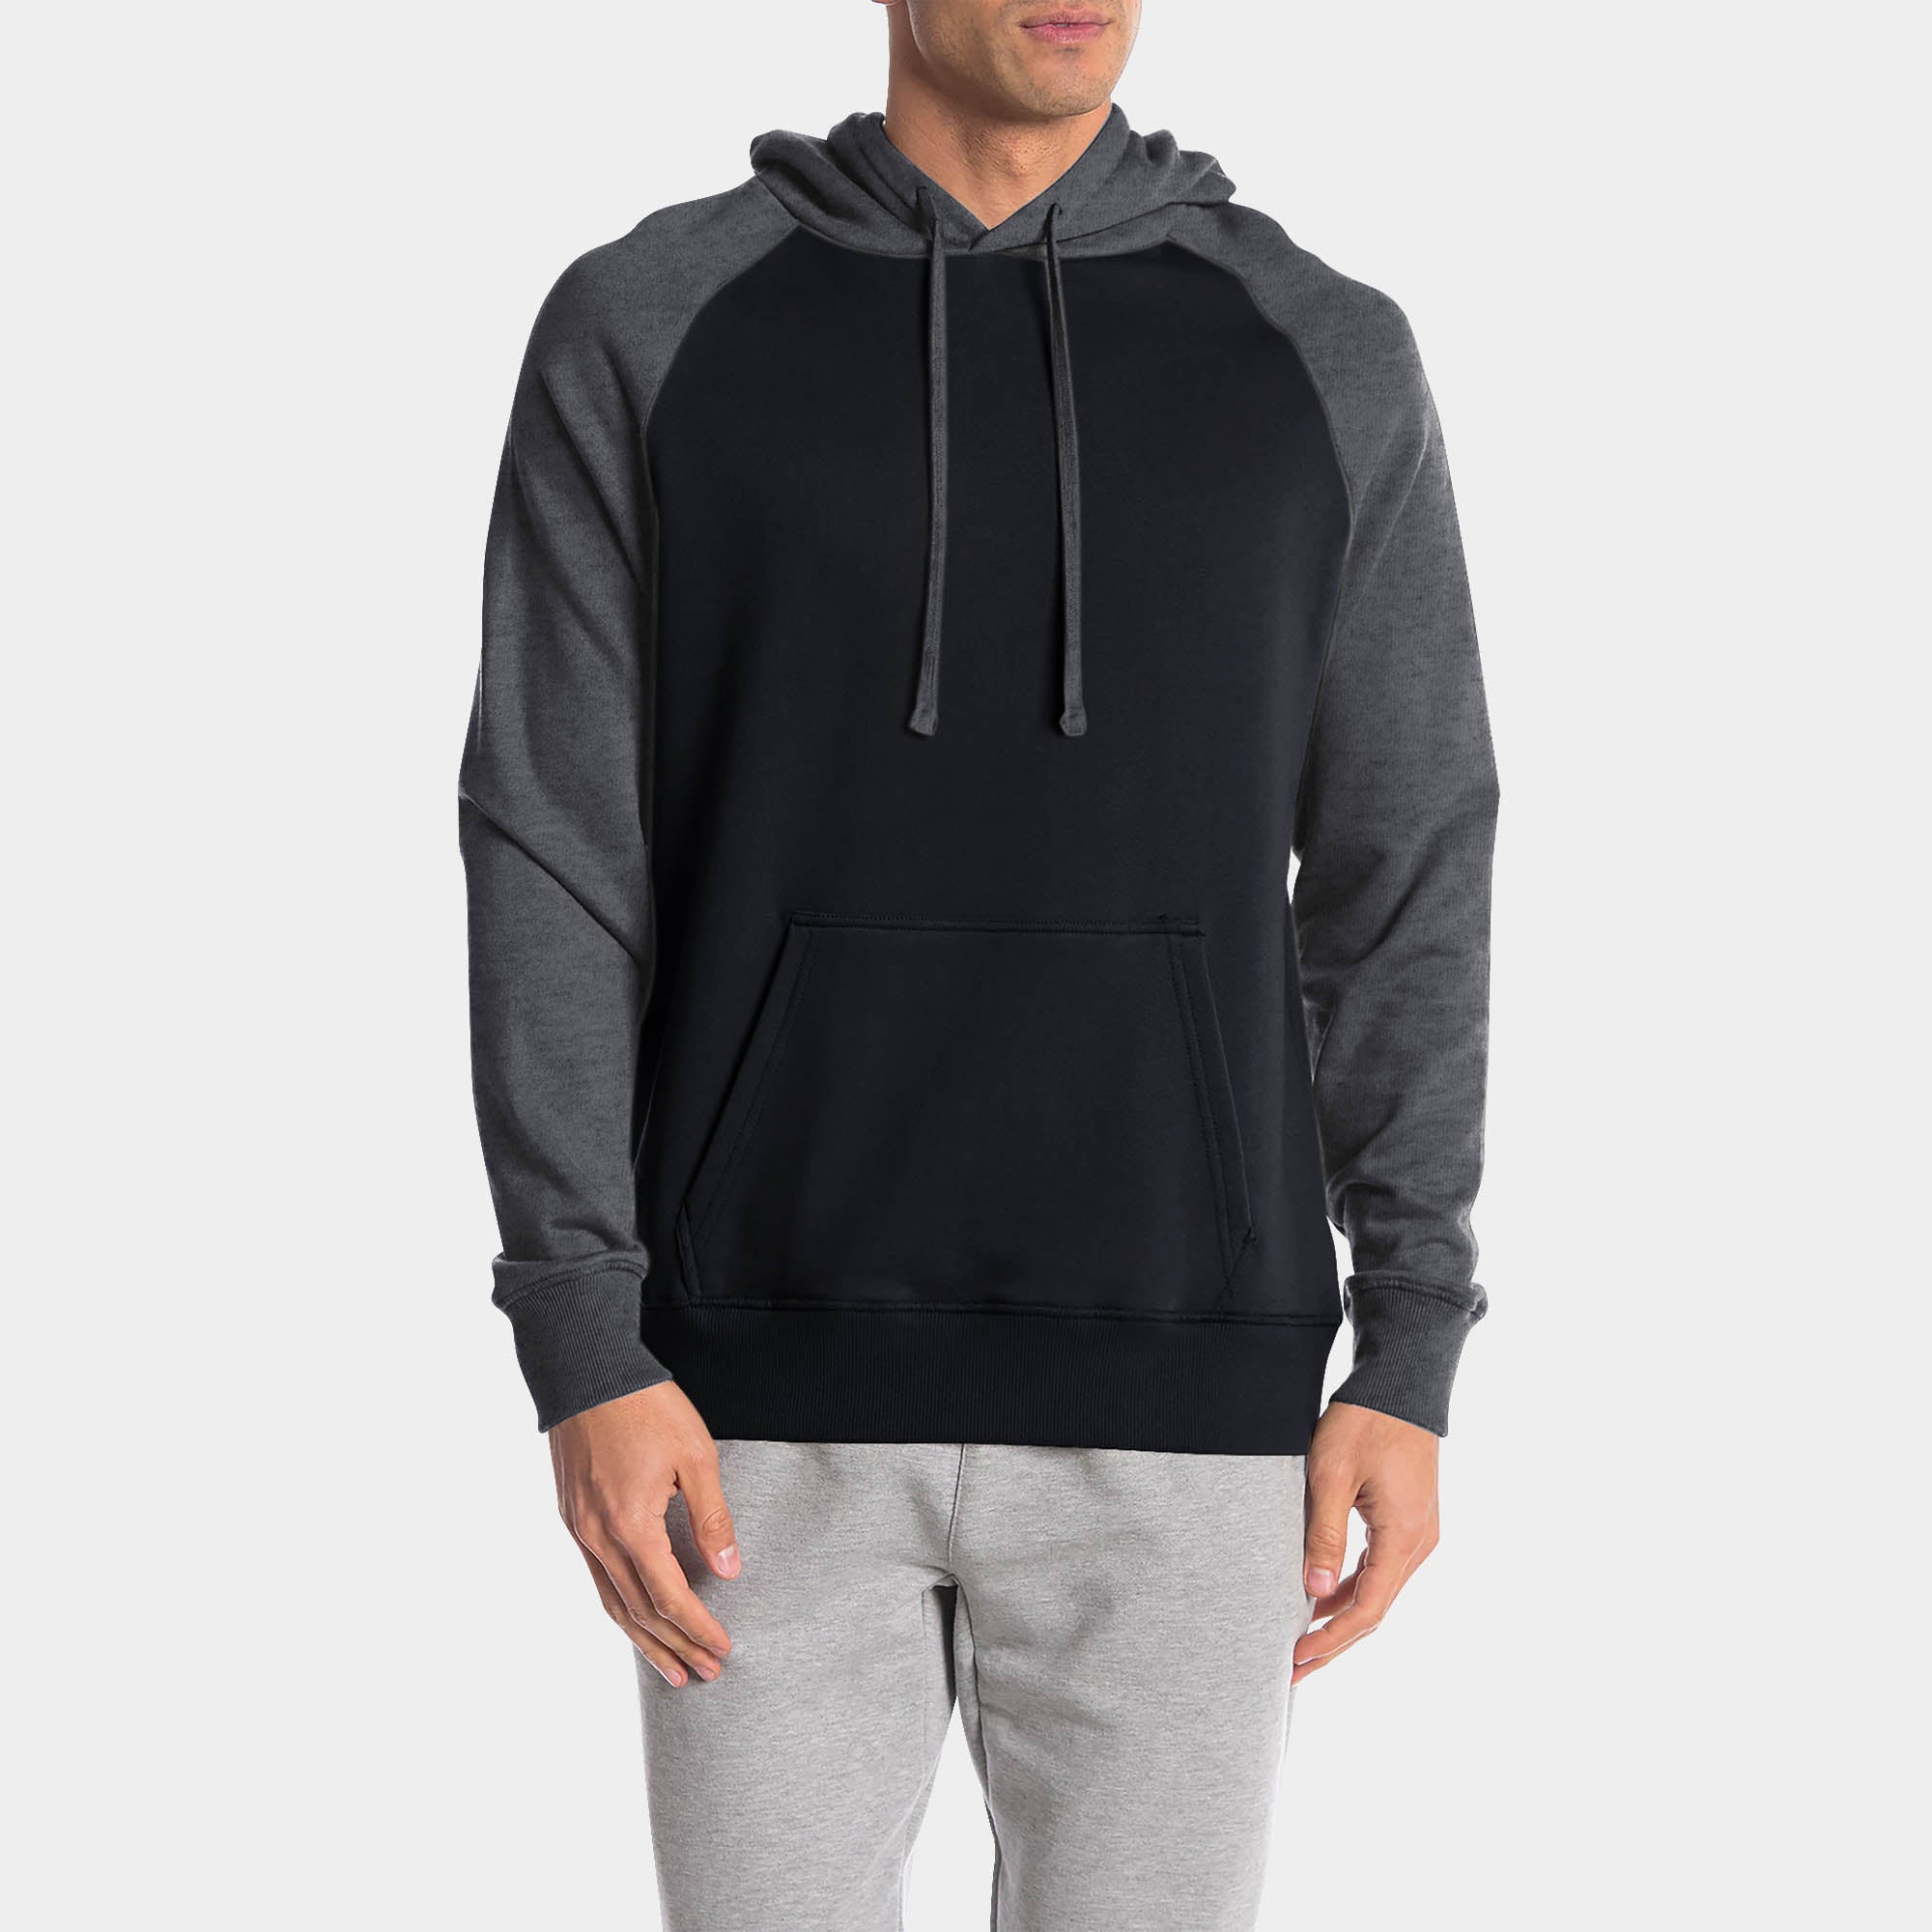 pullover hoodie_mens pullover hoodie_pullover sweatshirt_champion pullover hoodie_pullover adidas_hooded pullover_Black/Charcoal